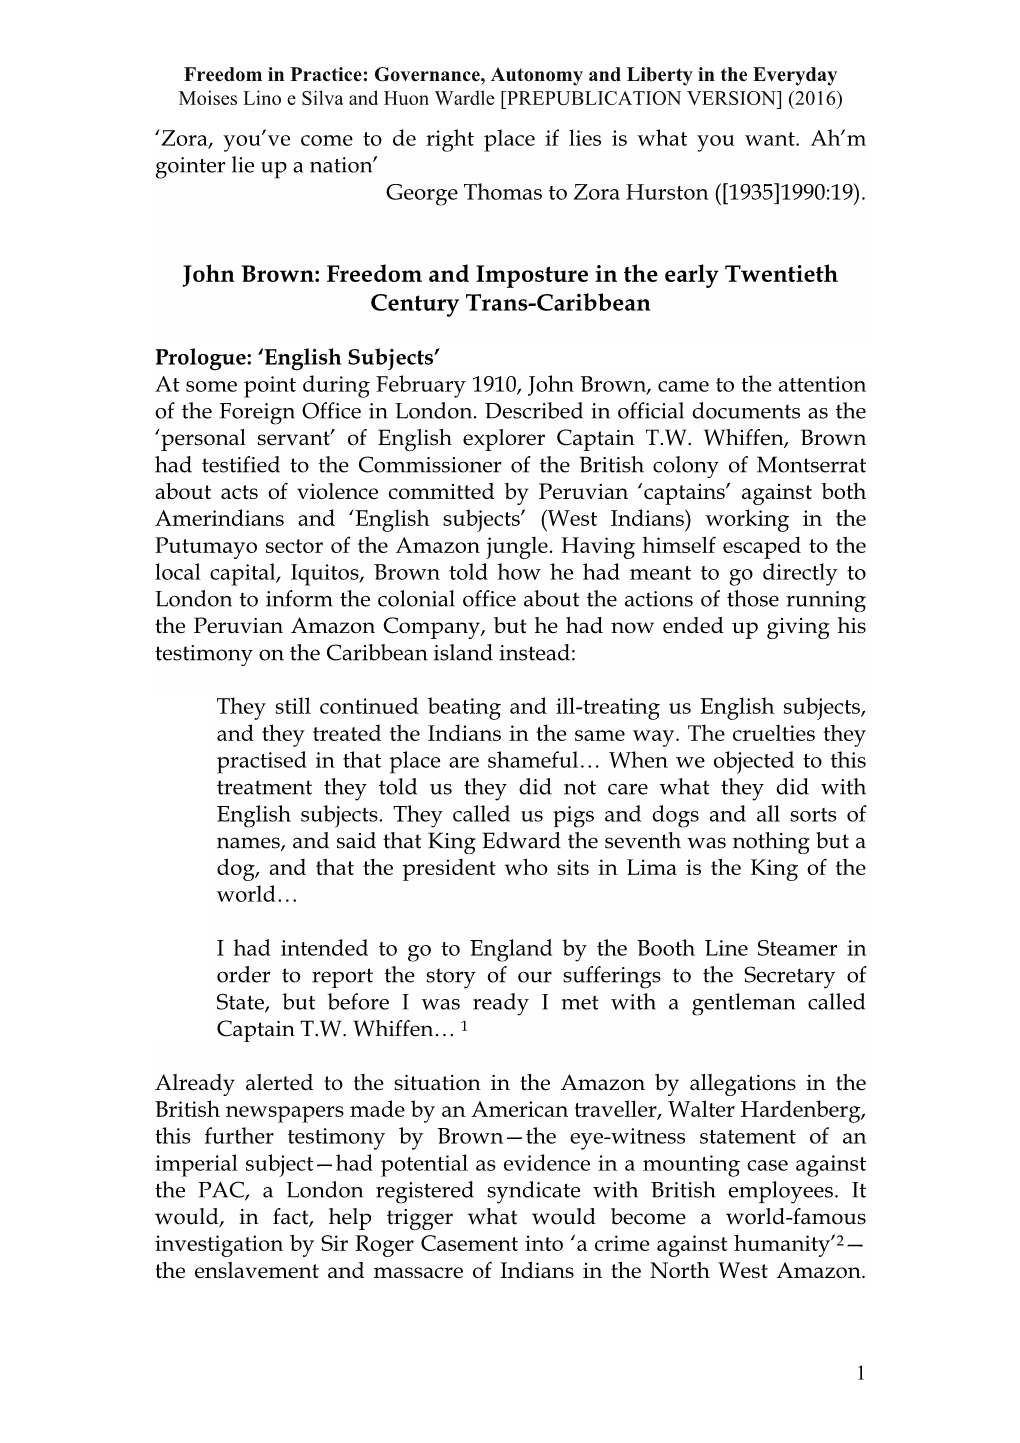 John Brown: Freedom and Imposture in the Early Twentieth Century Trans-Caribbean